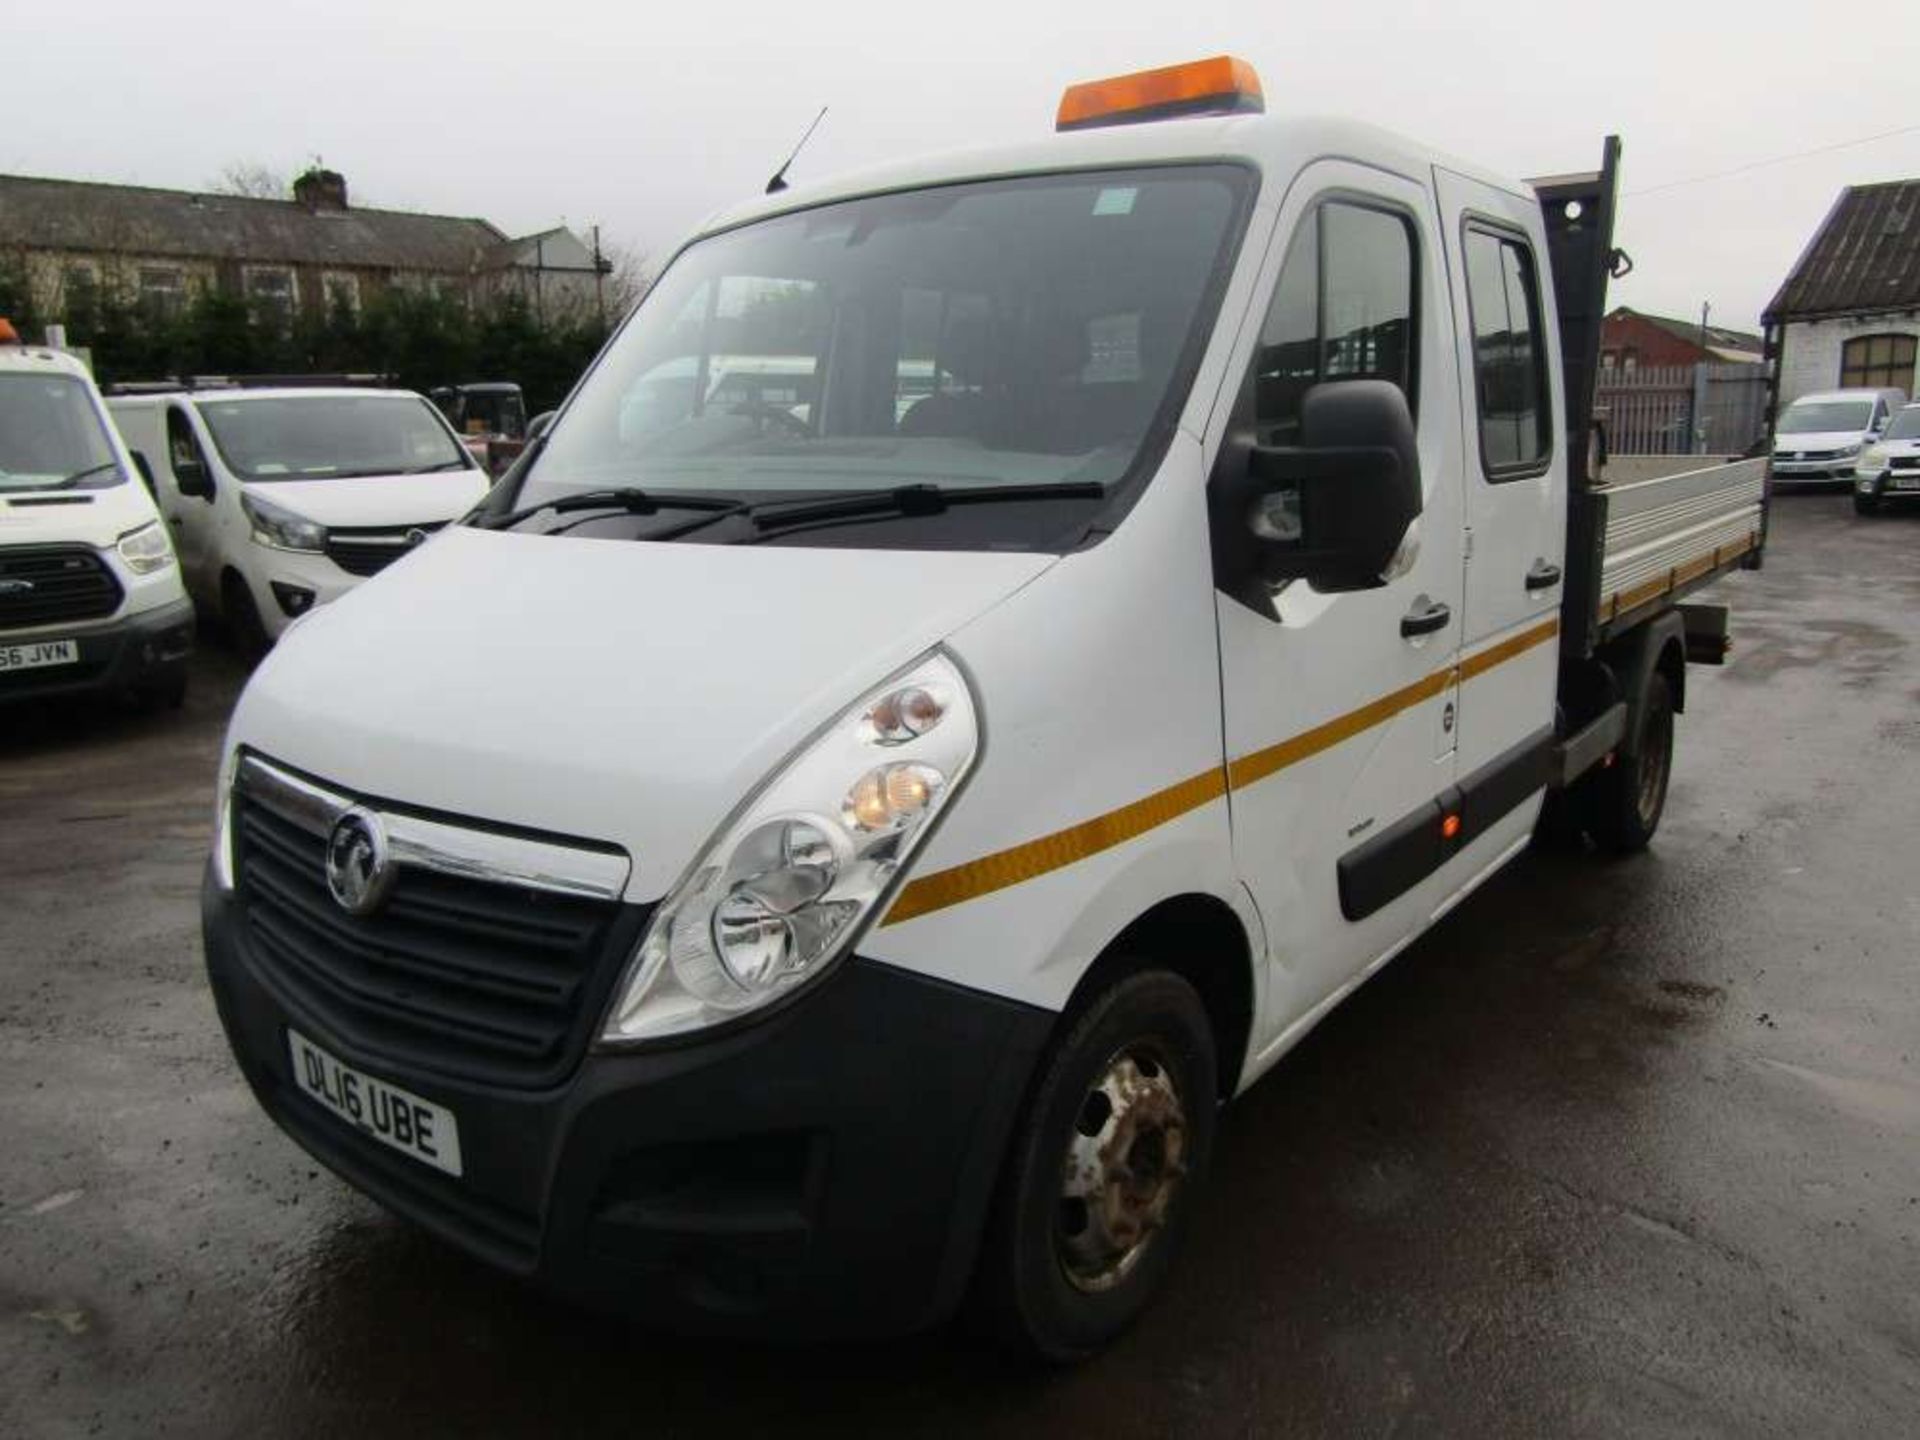 2016 16 reg Vauxhall Movano R3500 L3H1 CDTI DRW Double Cab Tipper - Image 2 of 6